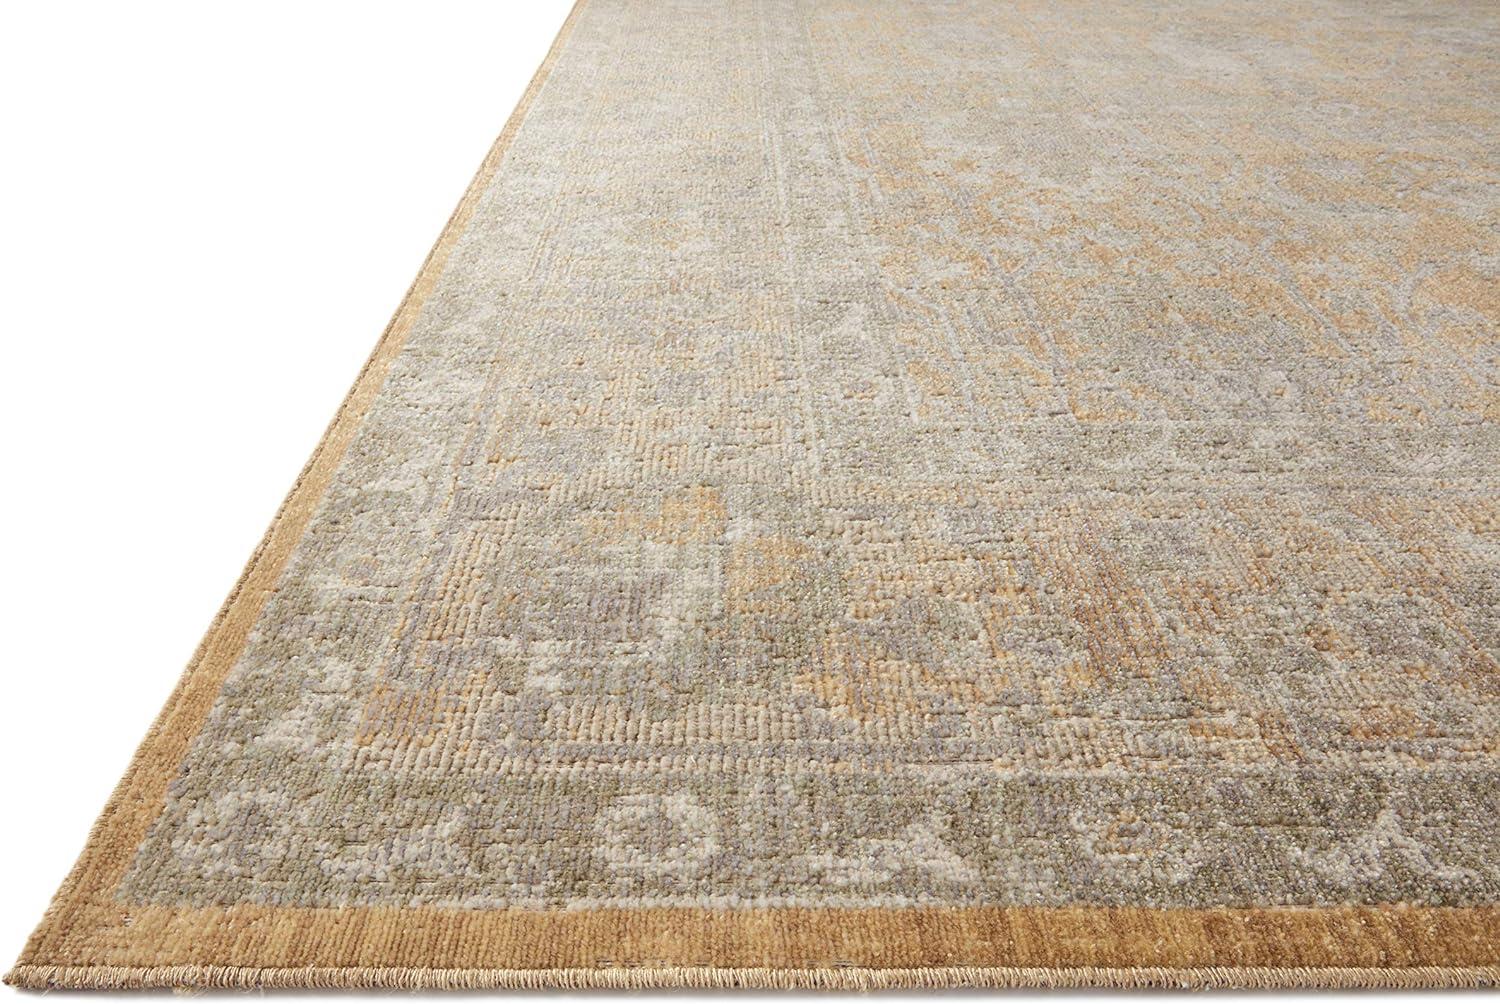 Elegant Gold and Sand 2'7" x 12' Runner Rug with Easy Care Synthetic Fibers